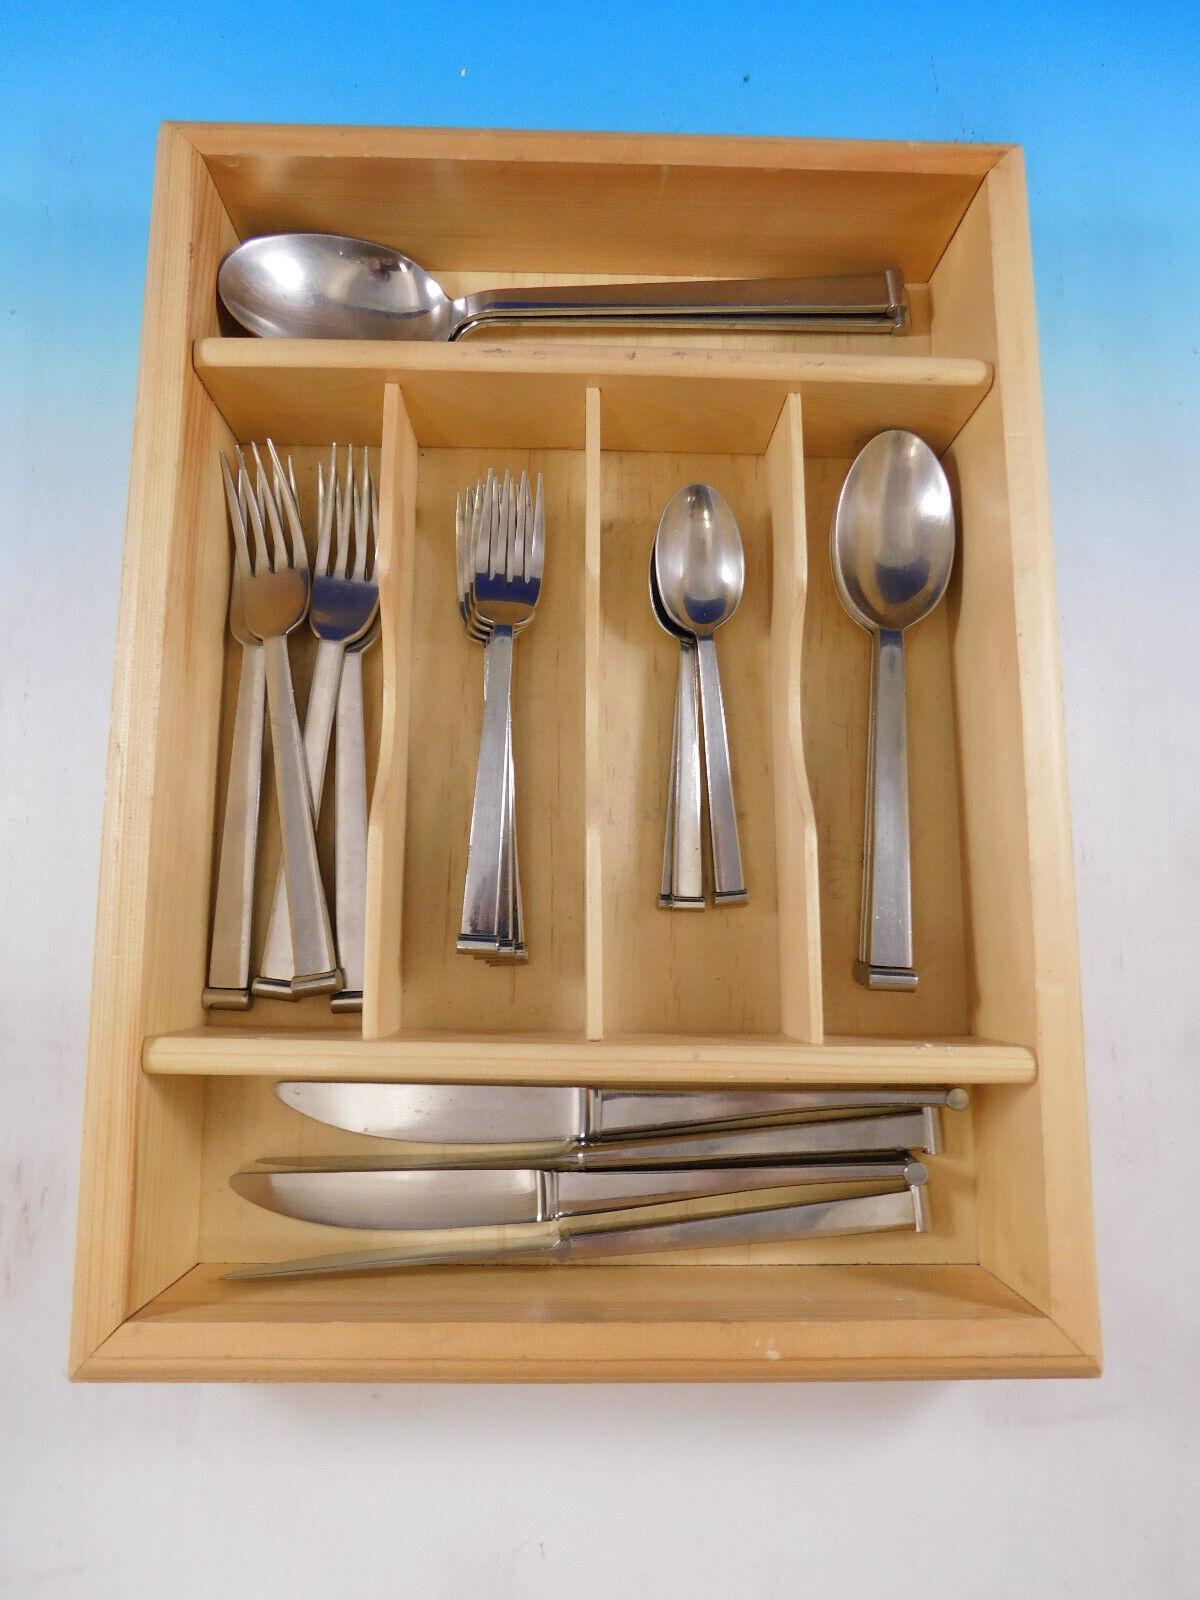 Rare Integrale by Christofle stainless steel flatware set with unique, modern design - 22 pieces. This pattern was discontinued in the year 2004. This set includes:

4 Knives, 9 1/4